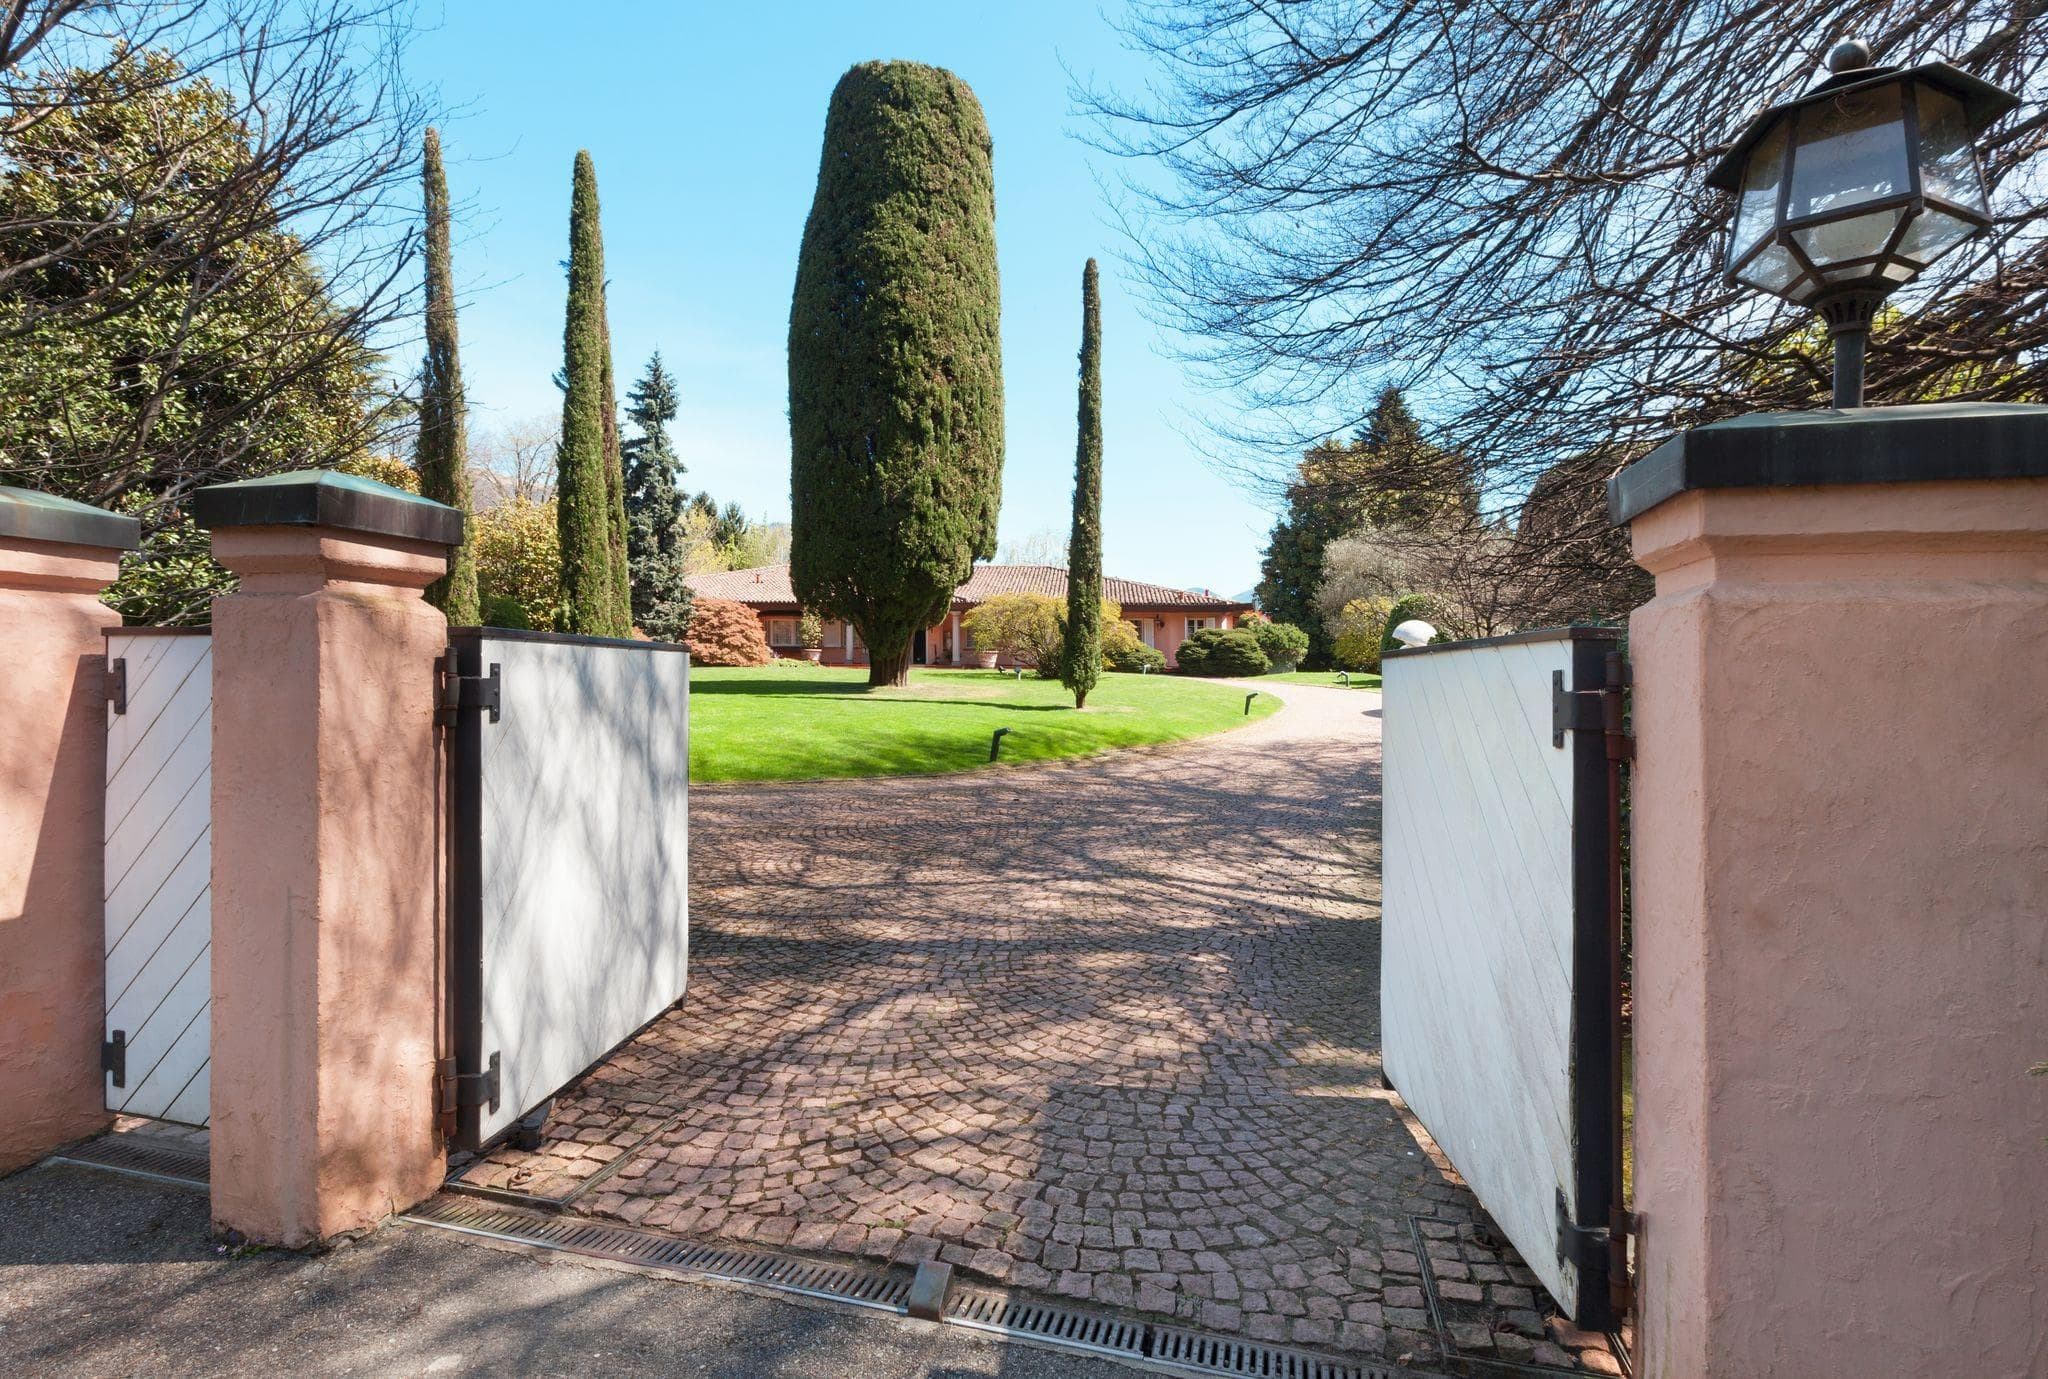 estate gates in beautiful white wood and steel